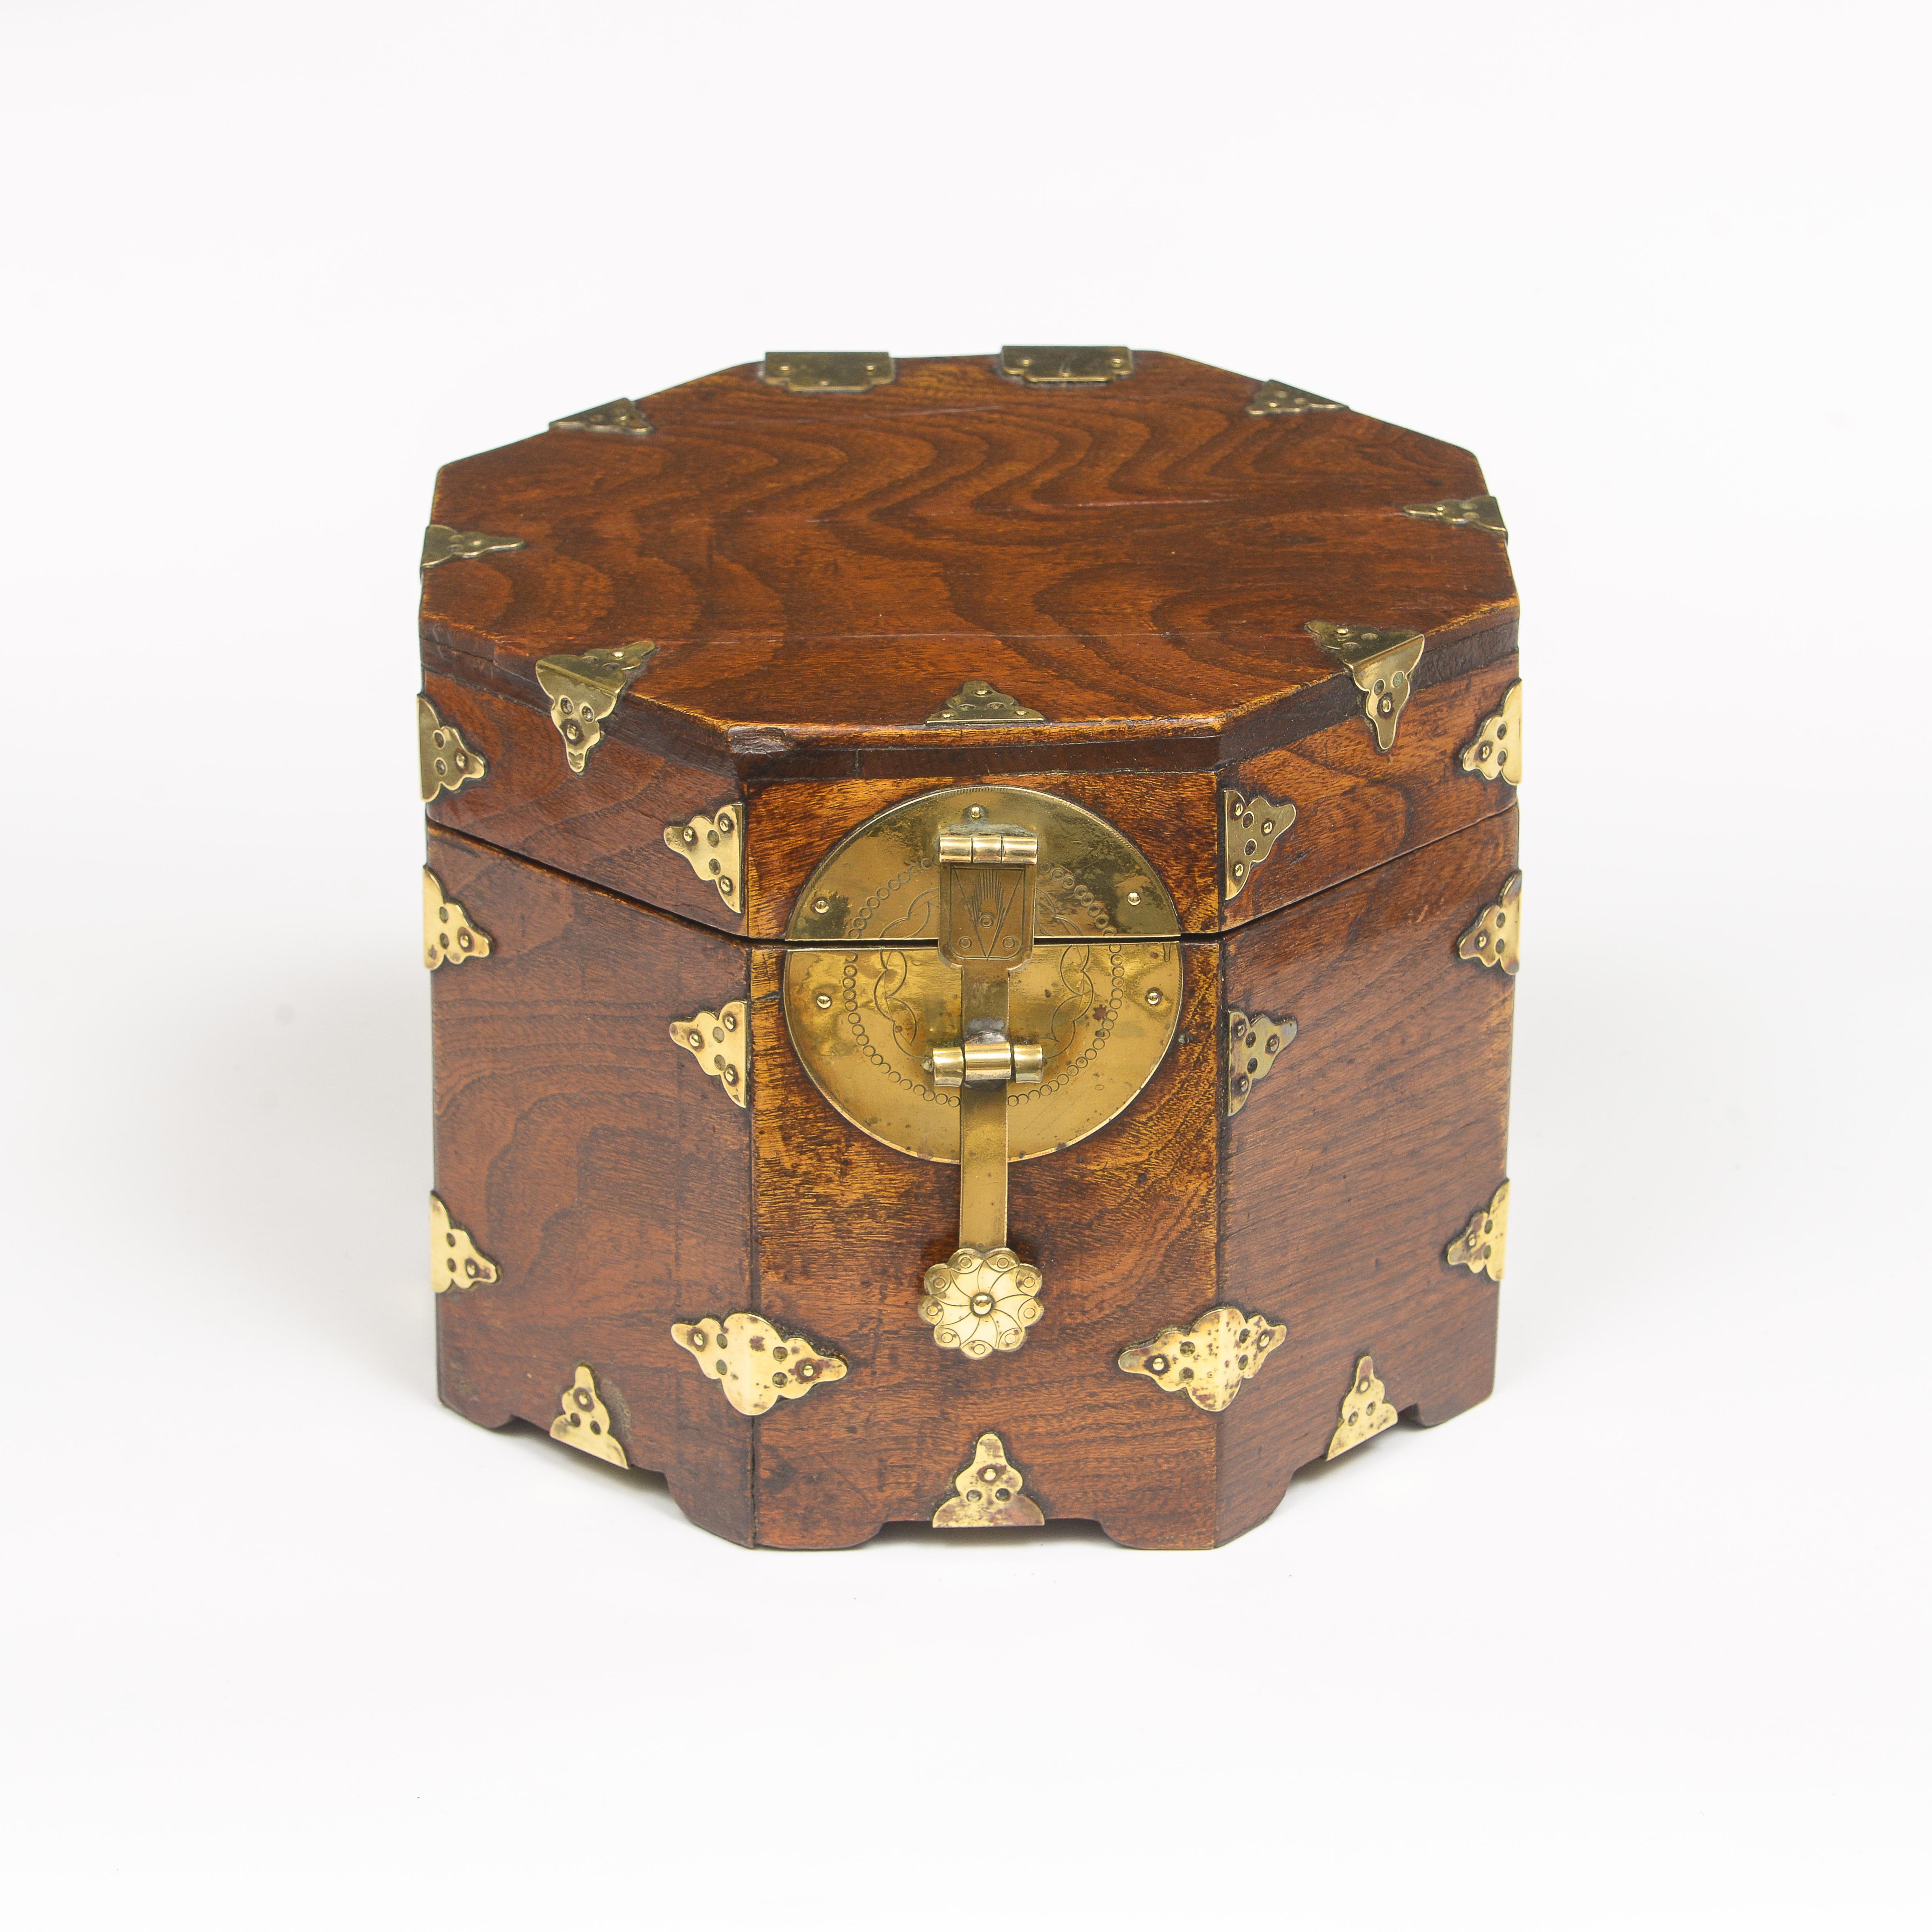 Brass bound octagonal Chinese Box
Made out of Jumu wood (Southern Elm)
Interior covered in Chinese paper